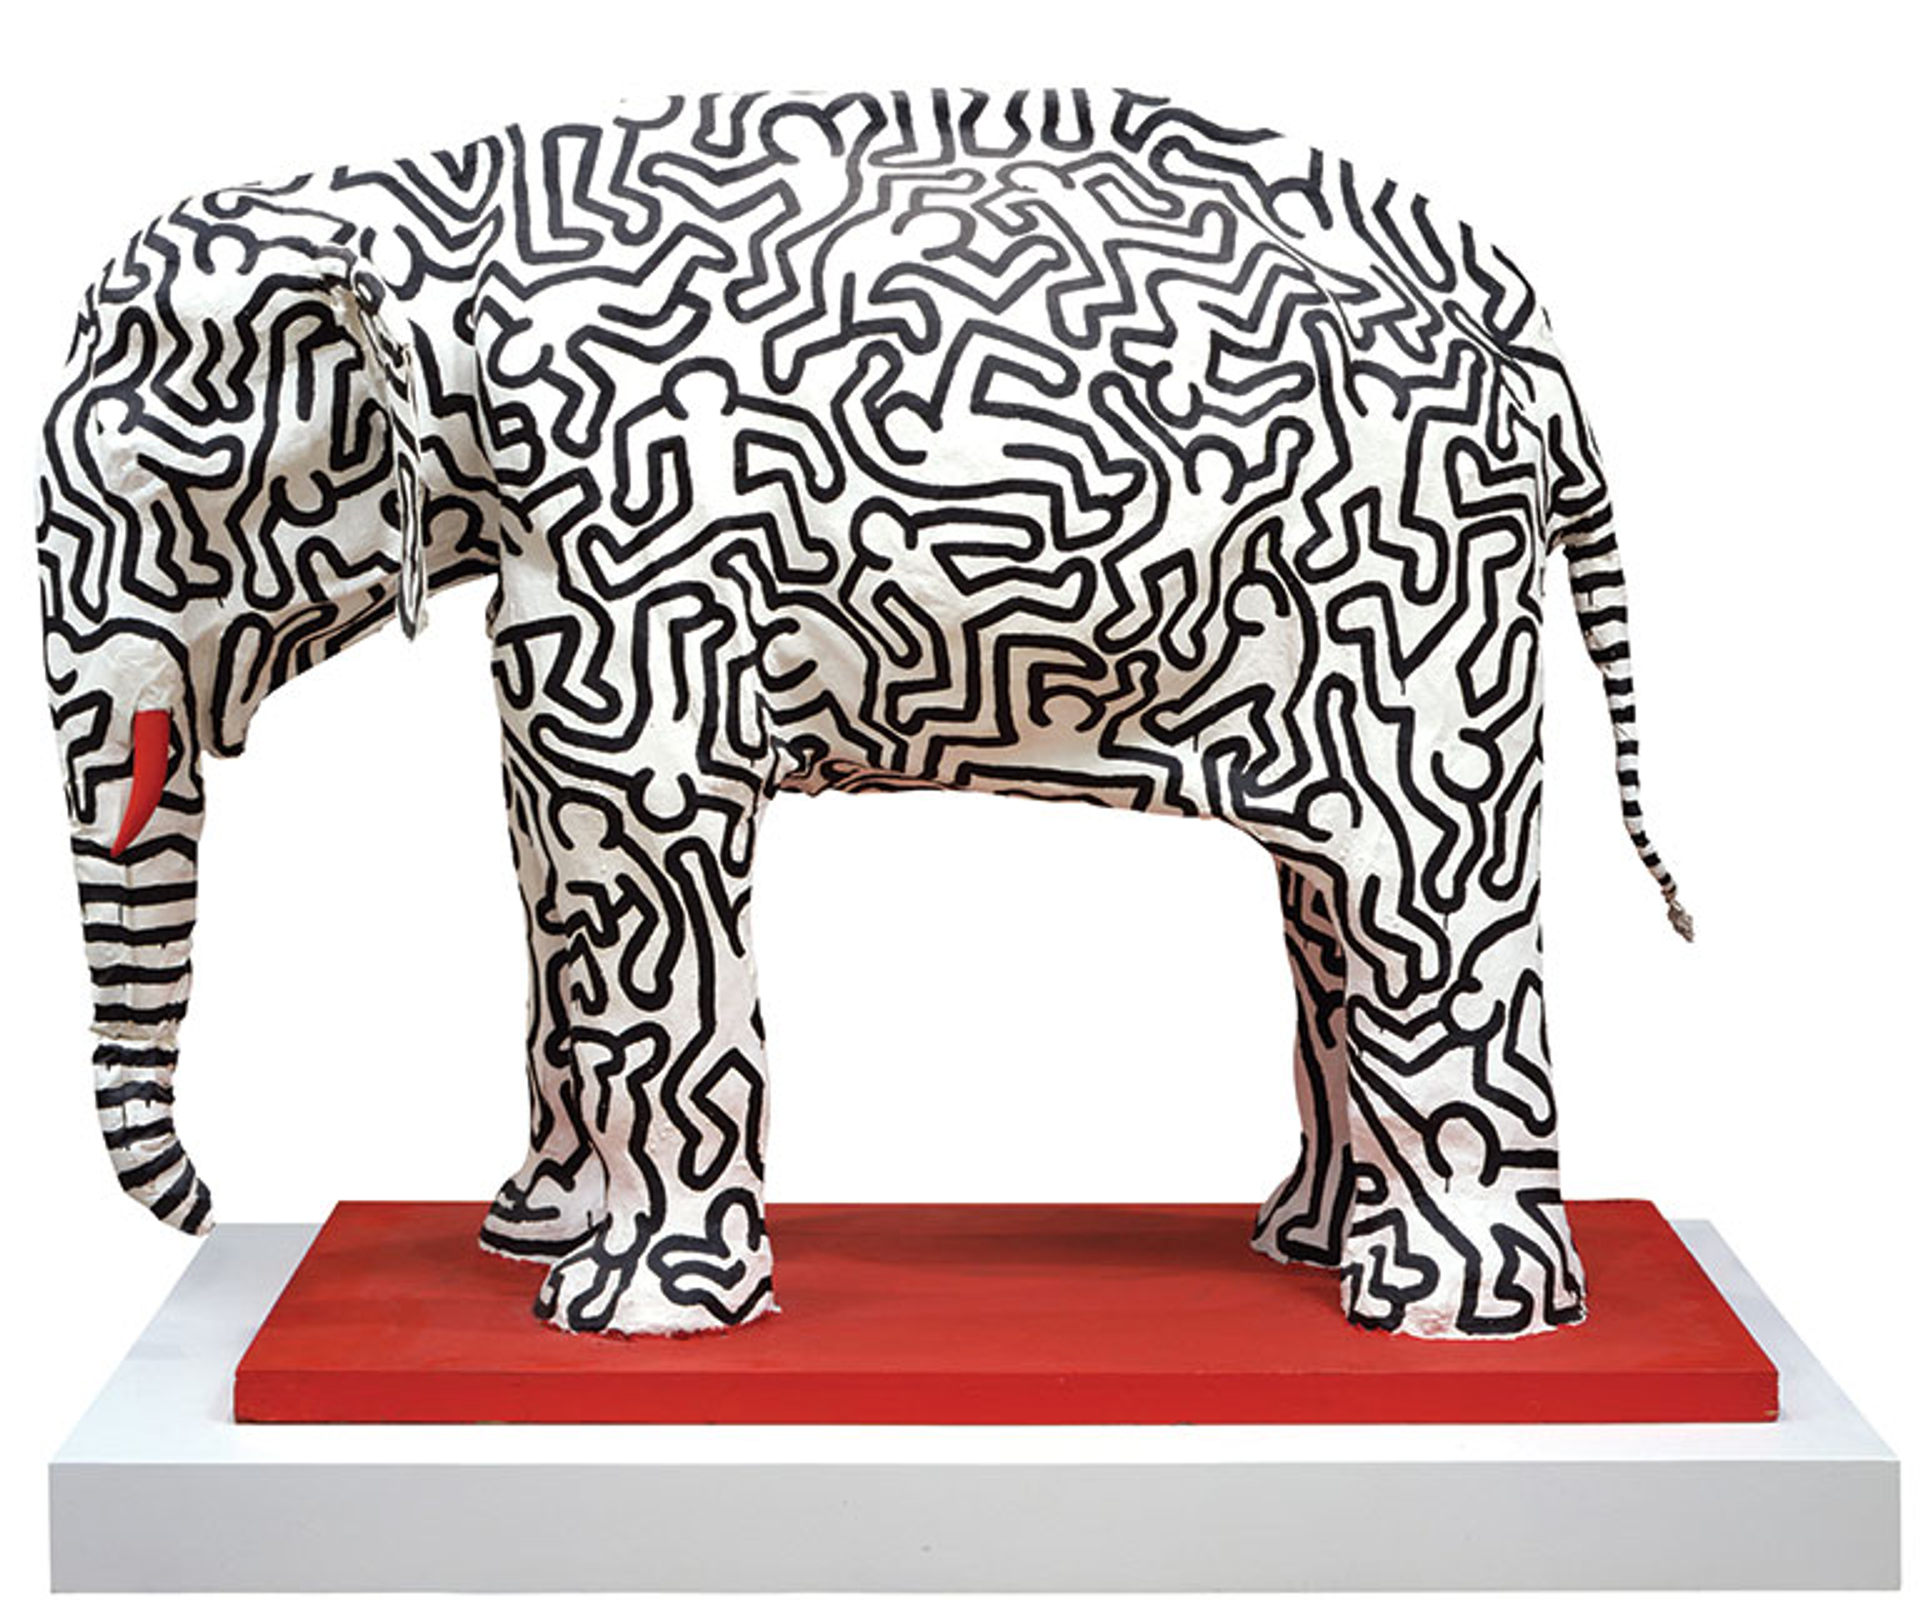 Keith Haring’s Untitled (Elephant). A paper mache sculpture of a white elephant with red tusks and black animated figures on its body.